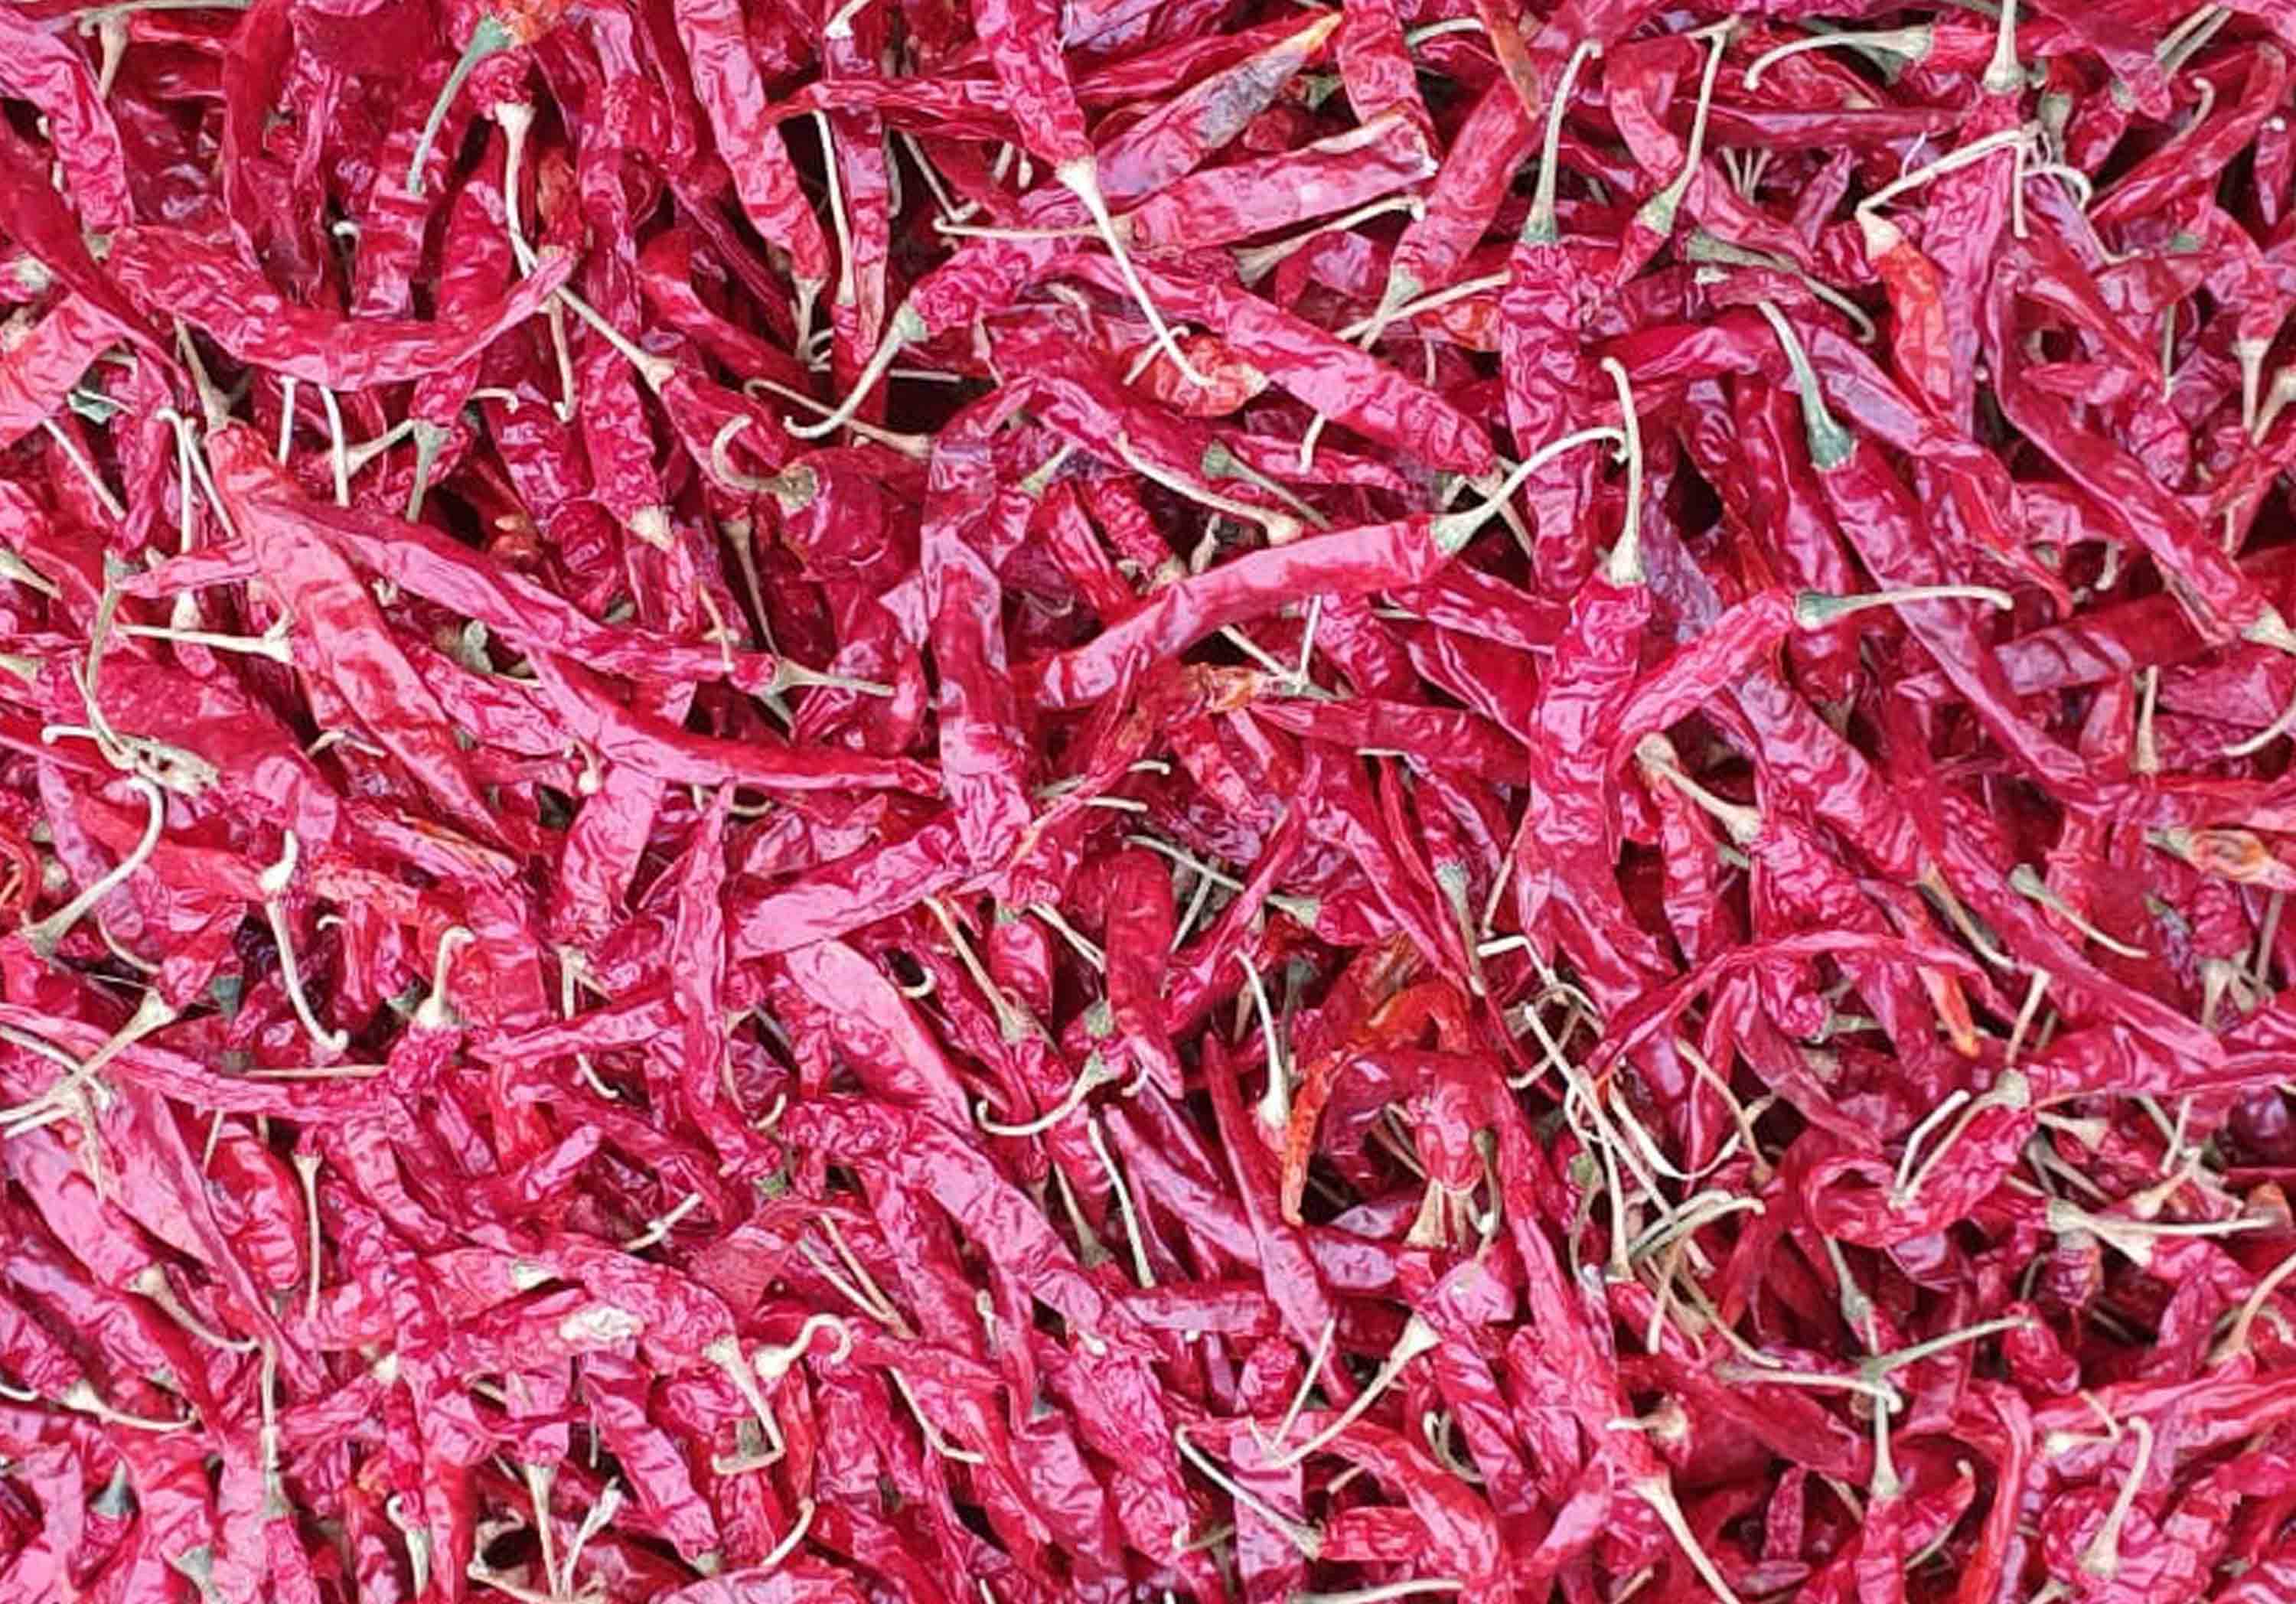 Wrinkle 273 Dried Red Chilli Suppliers in India